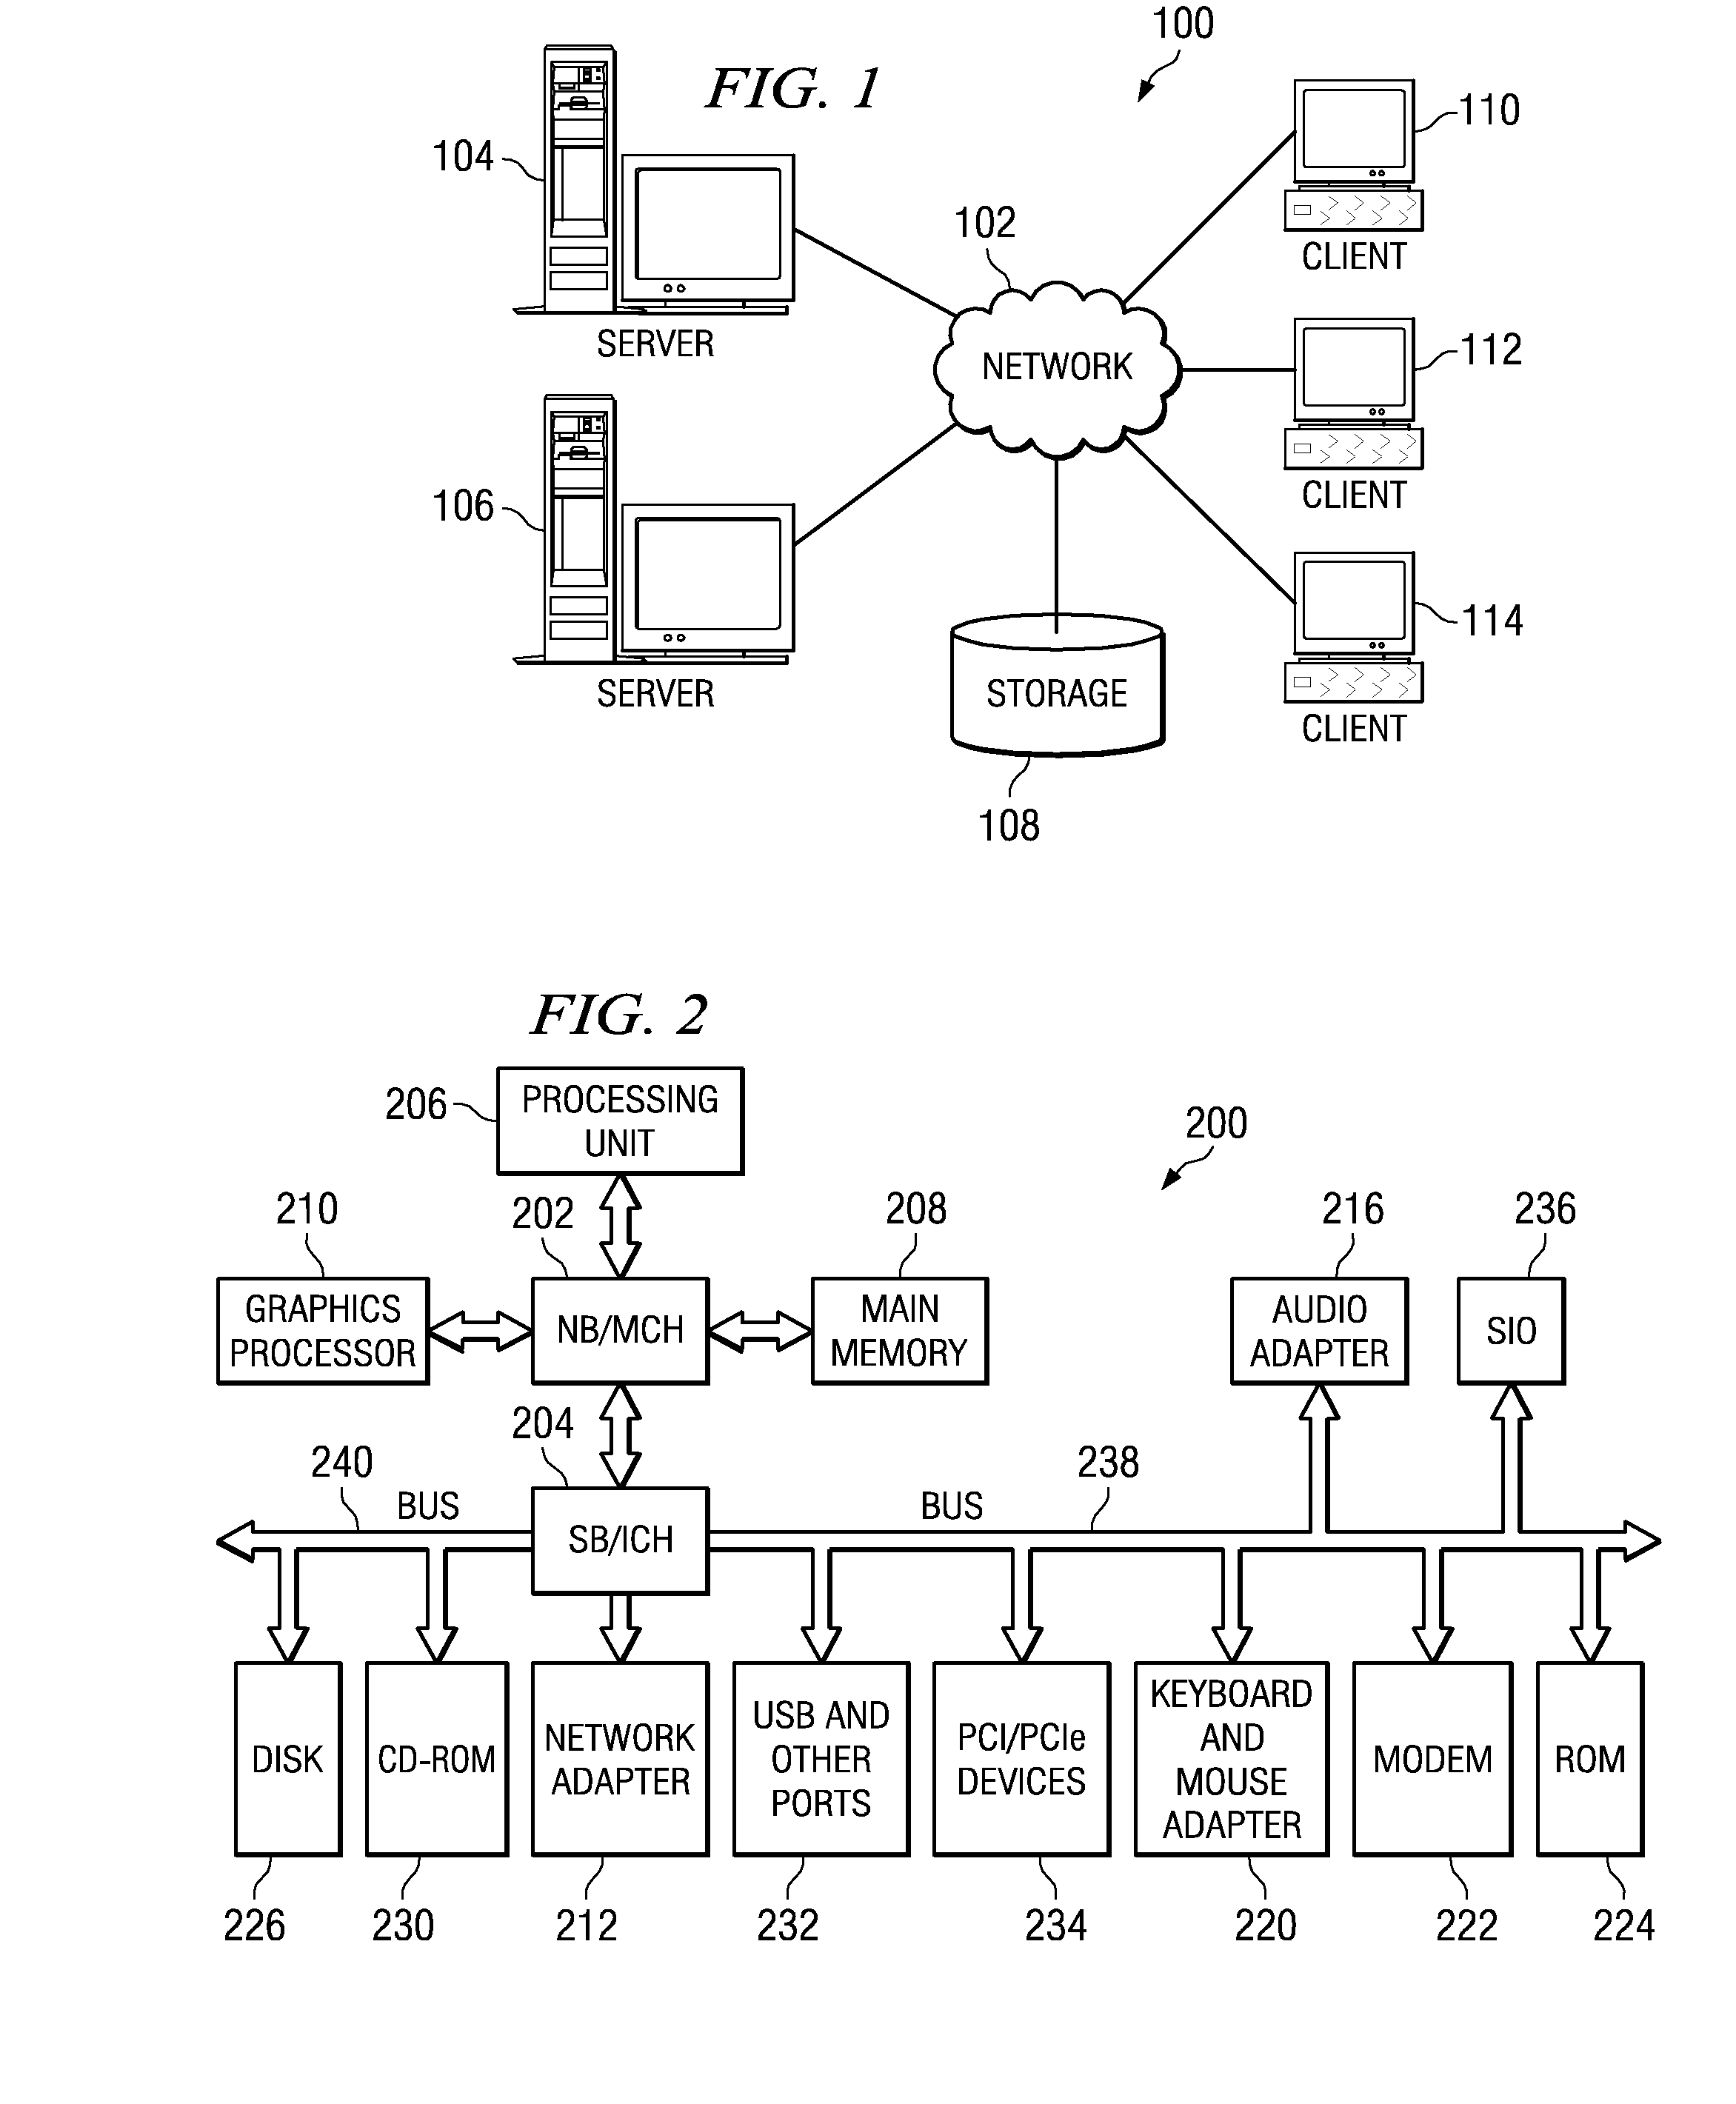 Method for Providing a Cluster-Wide System Clock in a Multi-Tiered Full-Graph Interconnect Architecture